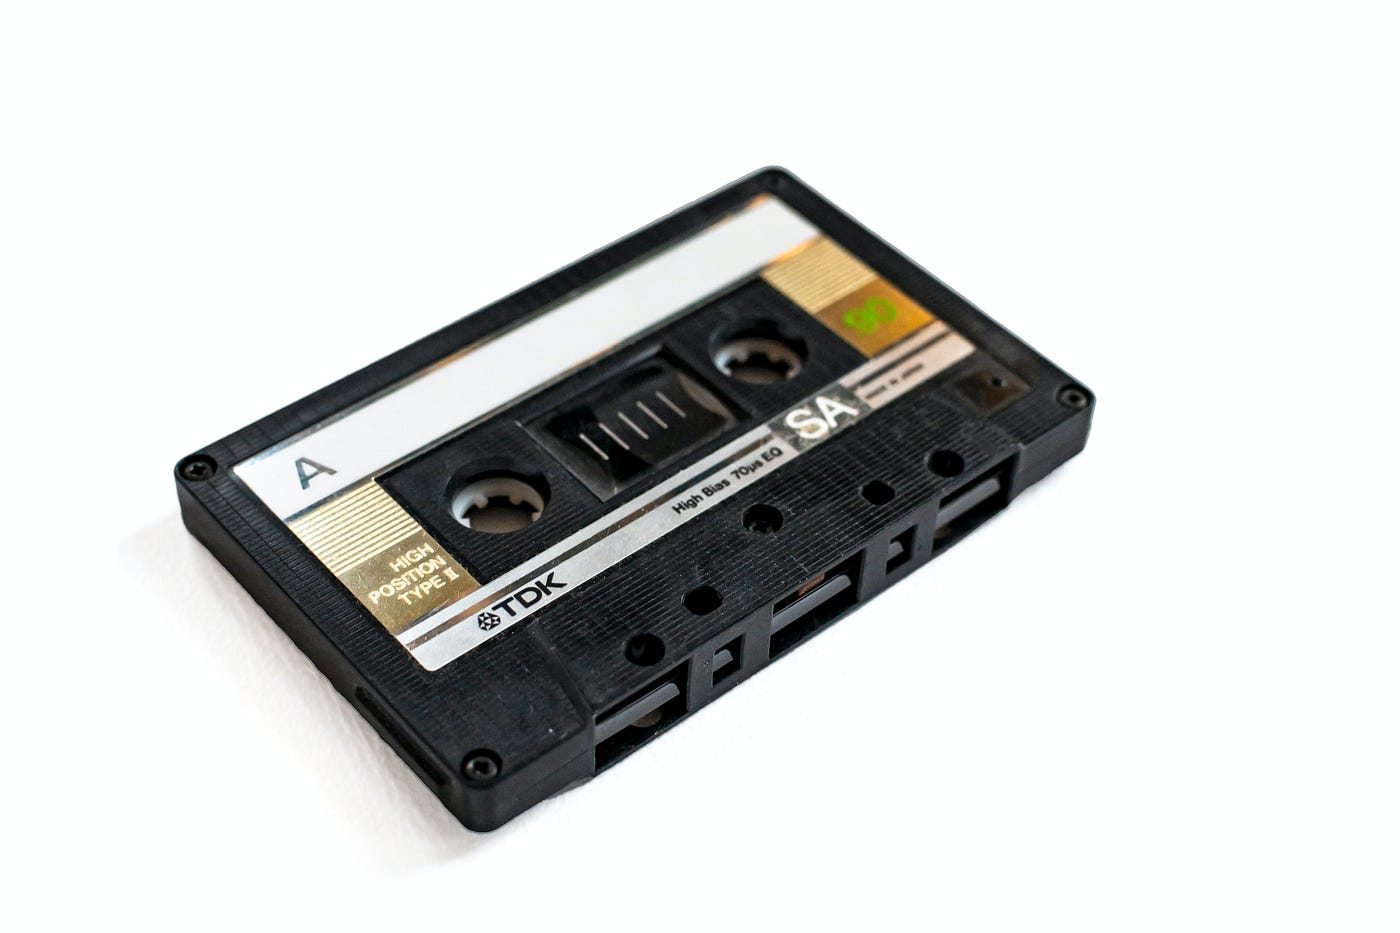 The Empowering Style of Cassette Tapes, by Clive Thompson